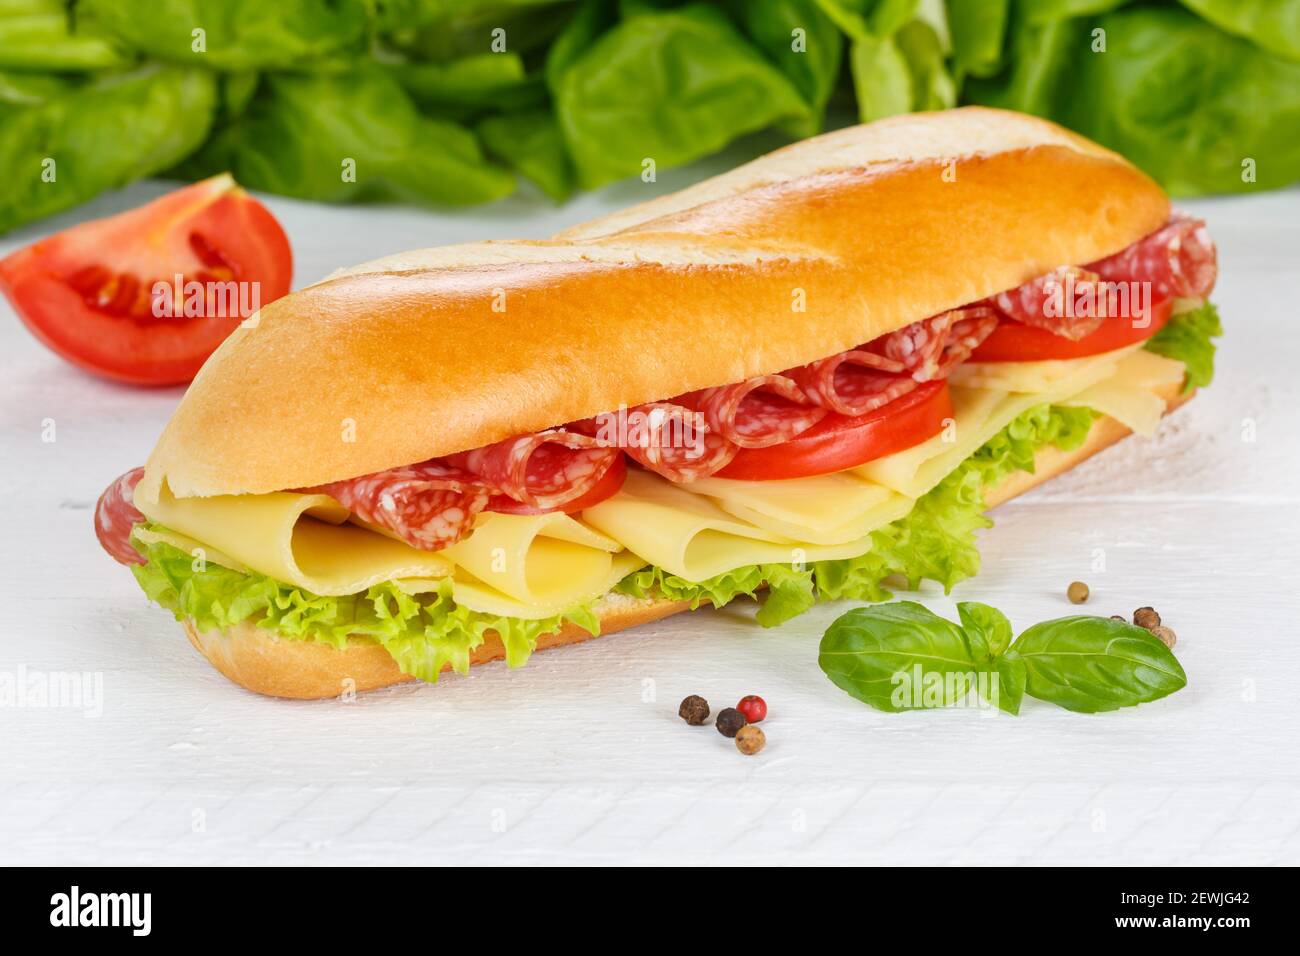 Sub sandwich baguette with salami ham and cheese on wooden board wood. Stock Photo